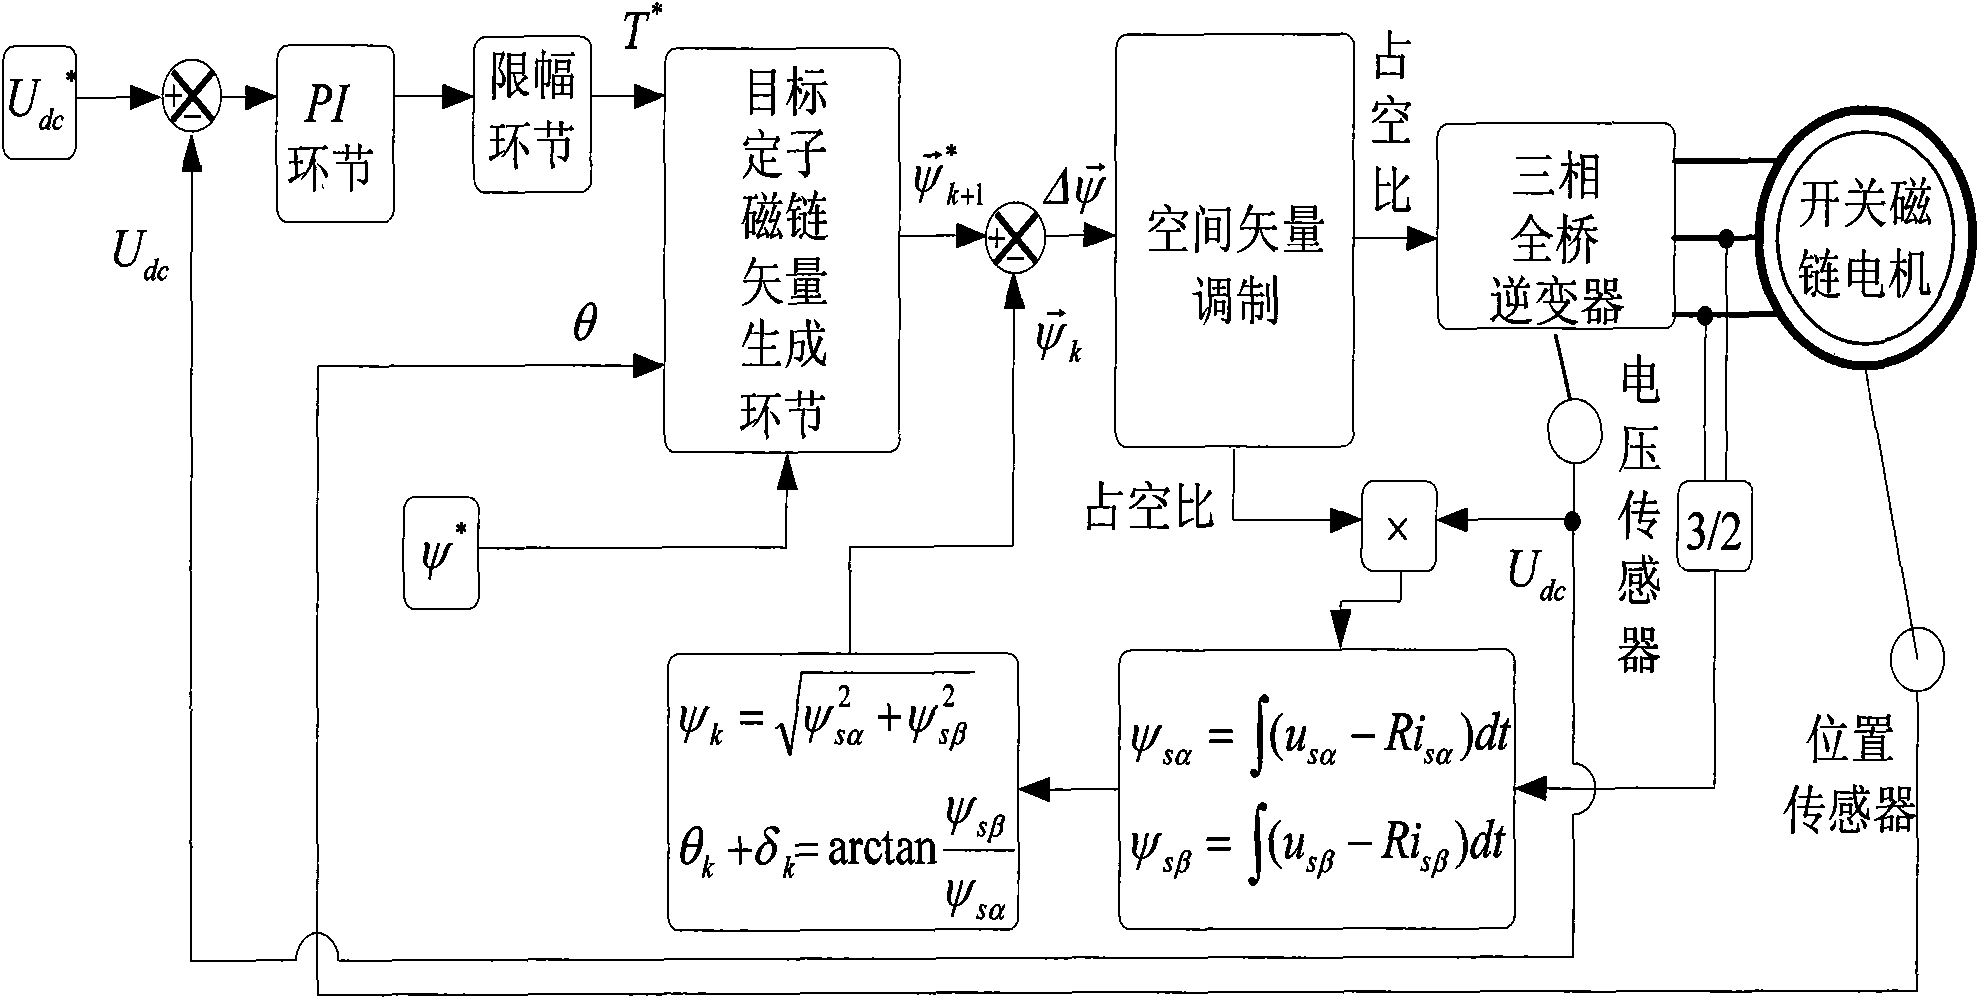 Permanent magnet flux-switching generator voltage control method by space vector modulation